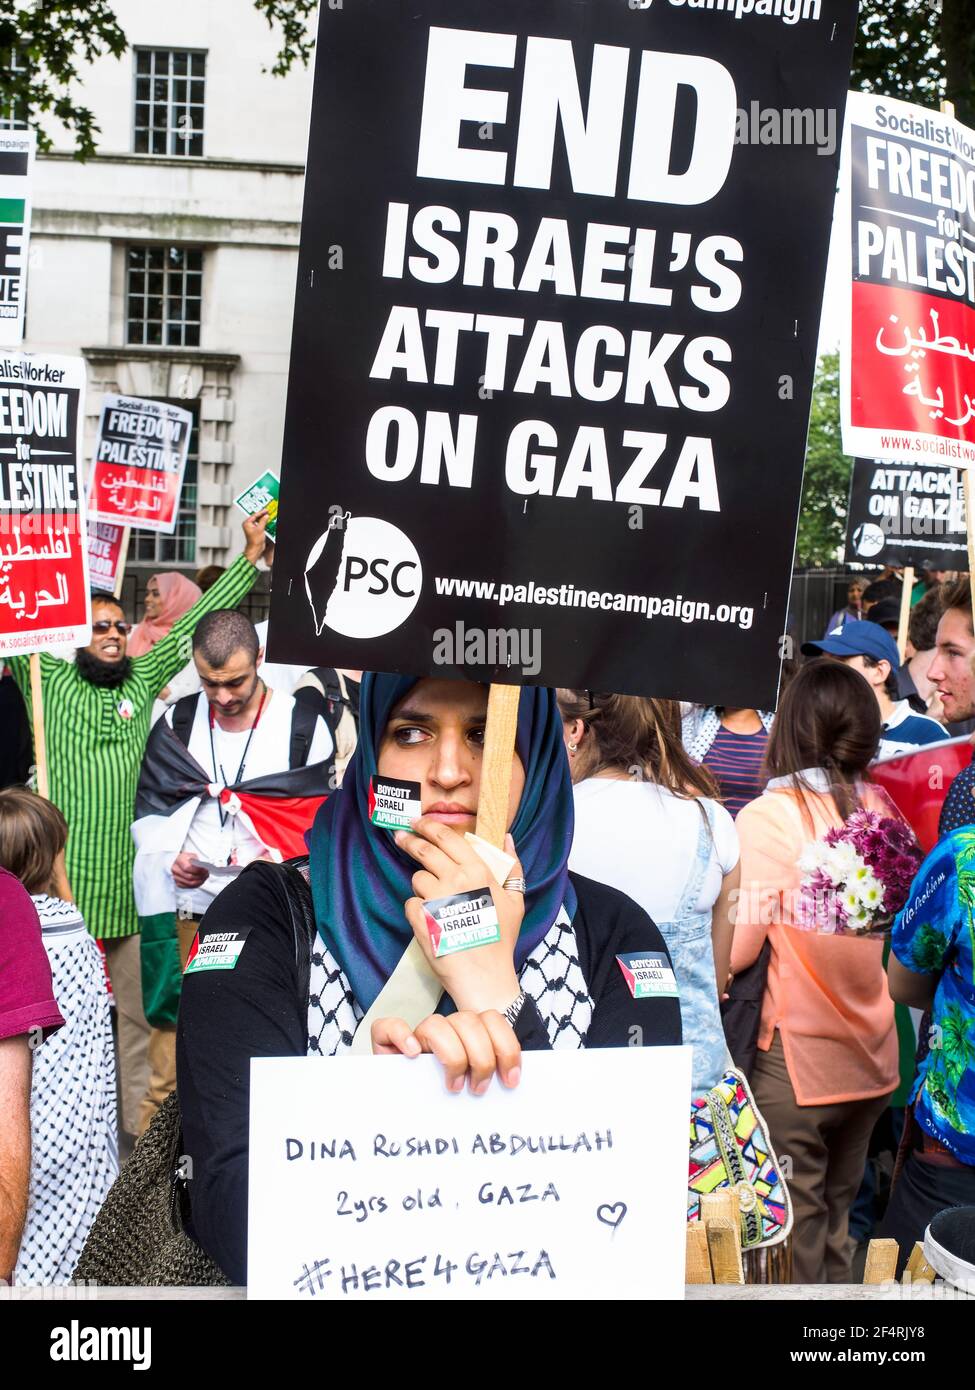 29th July 2014 march against Zionism - Protest against the bombing on Gaza - London, England Stock Photo